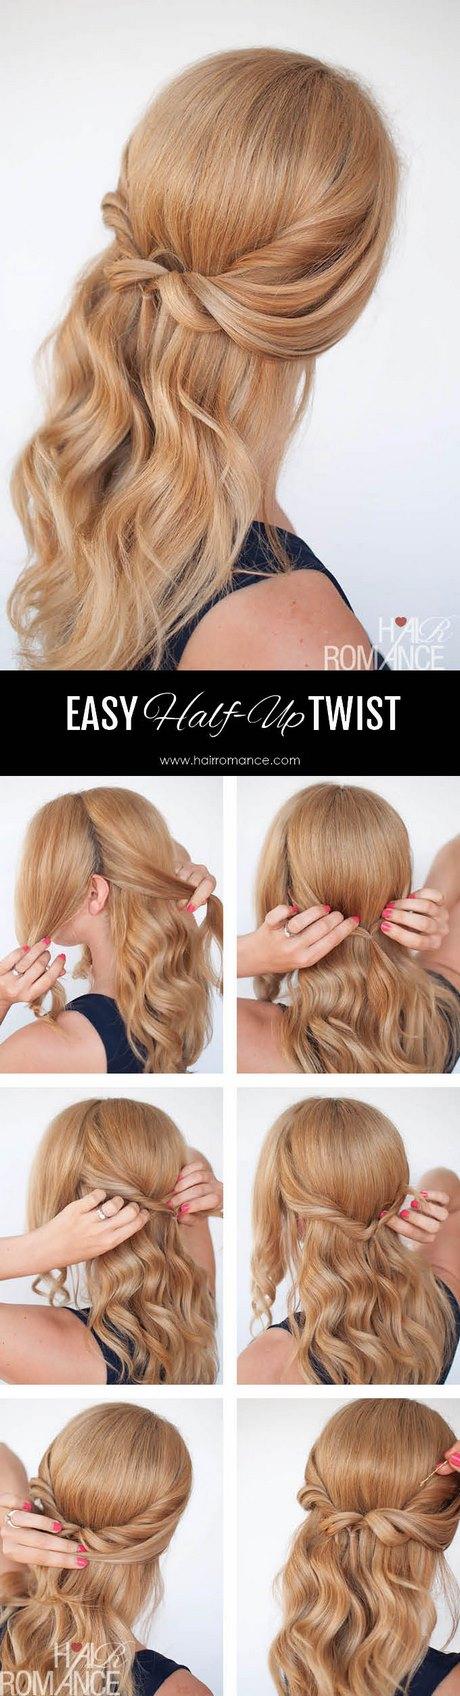 Easy half up and half down hairstyles easy-half-up-and-half-down-hairstyles-65_10